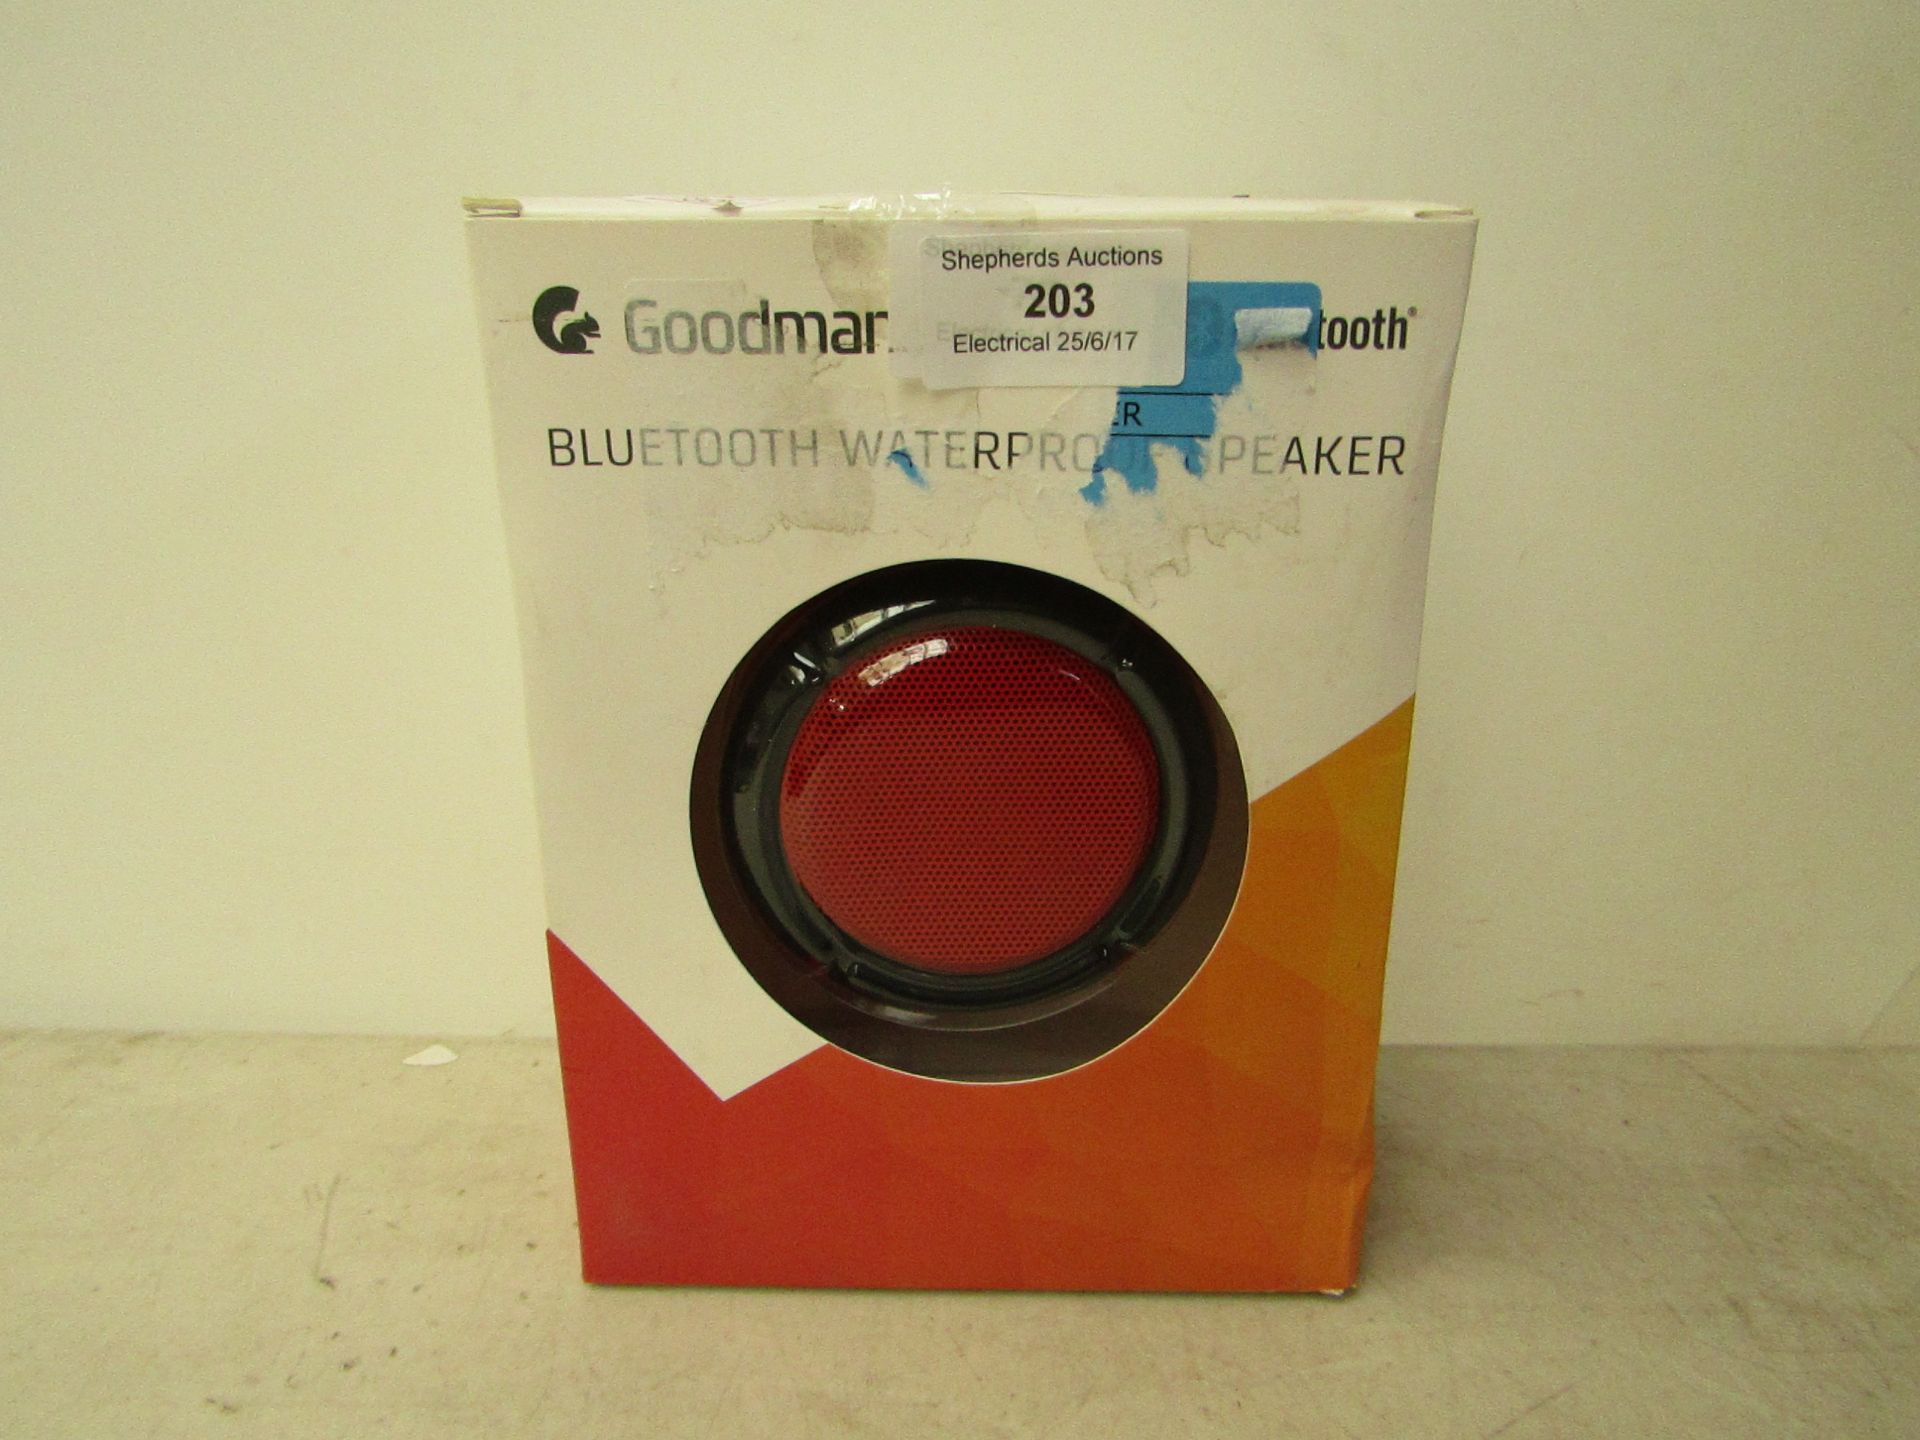 Goodmans Bluetooth waterproof speaker, unchecked and boxed.